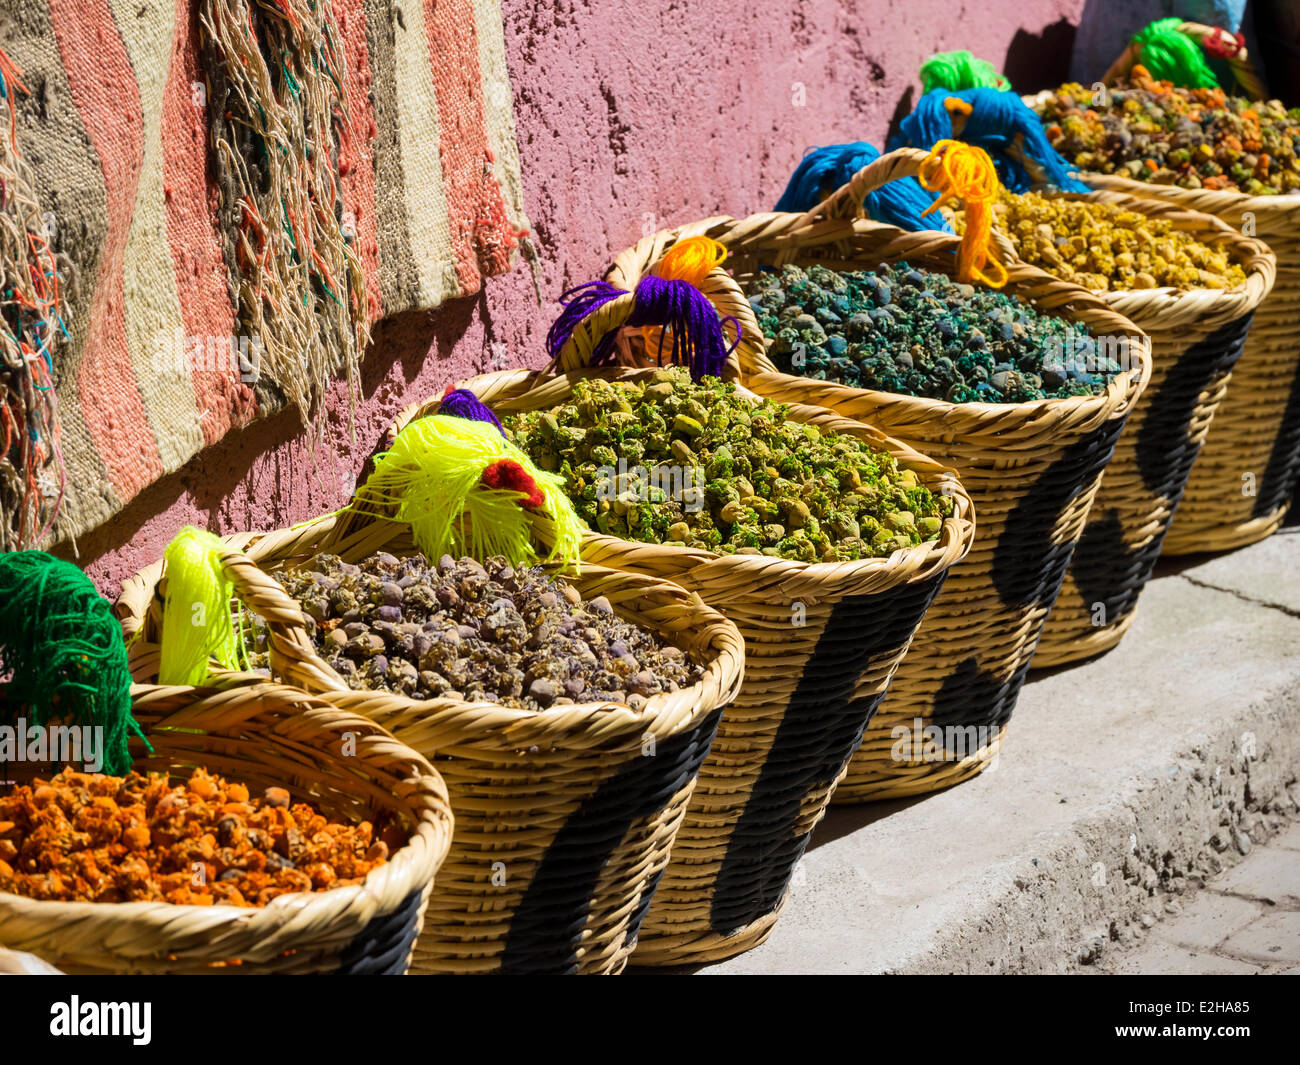 Spices are on sale in baskets, historic Medina, Marrakech, Marrakech-Tensift-El Haouz, Morocco Stock Photo